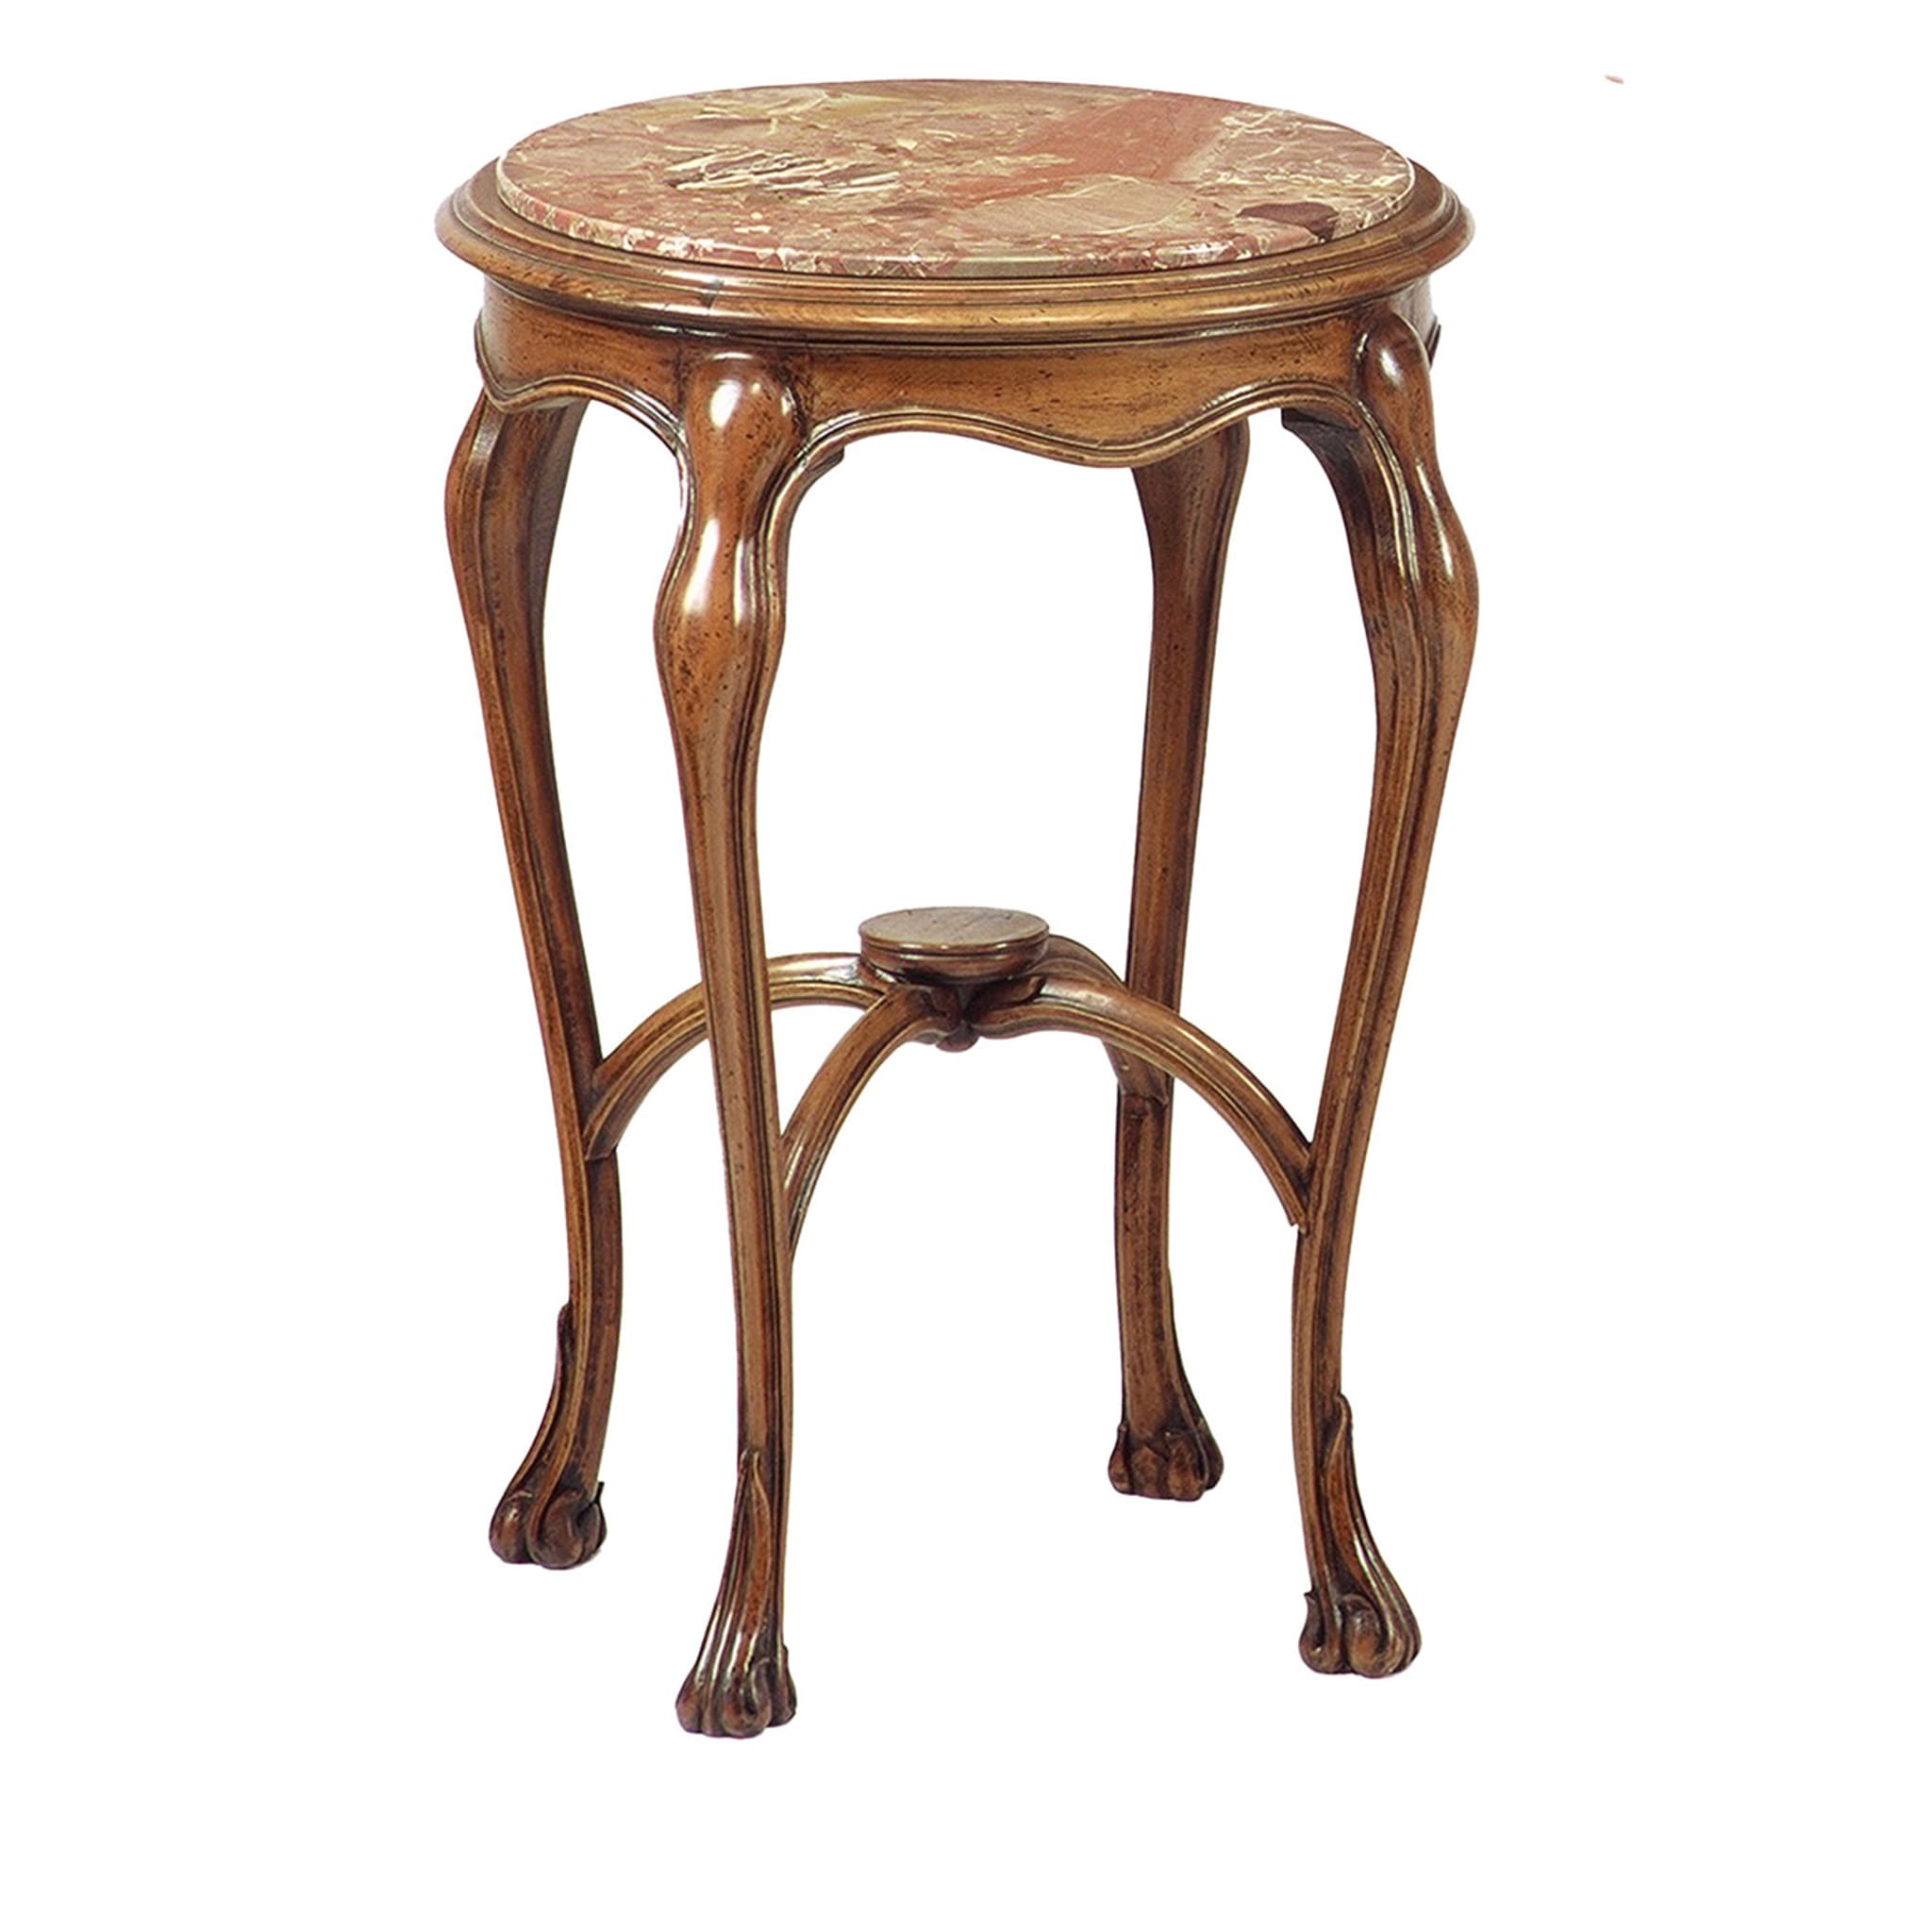 French Art Nouveau-Style Round Side Table with Macchiavecchia Top - Main view